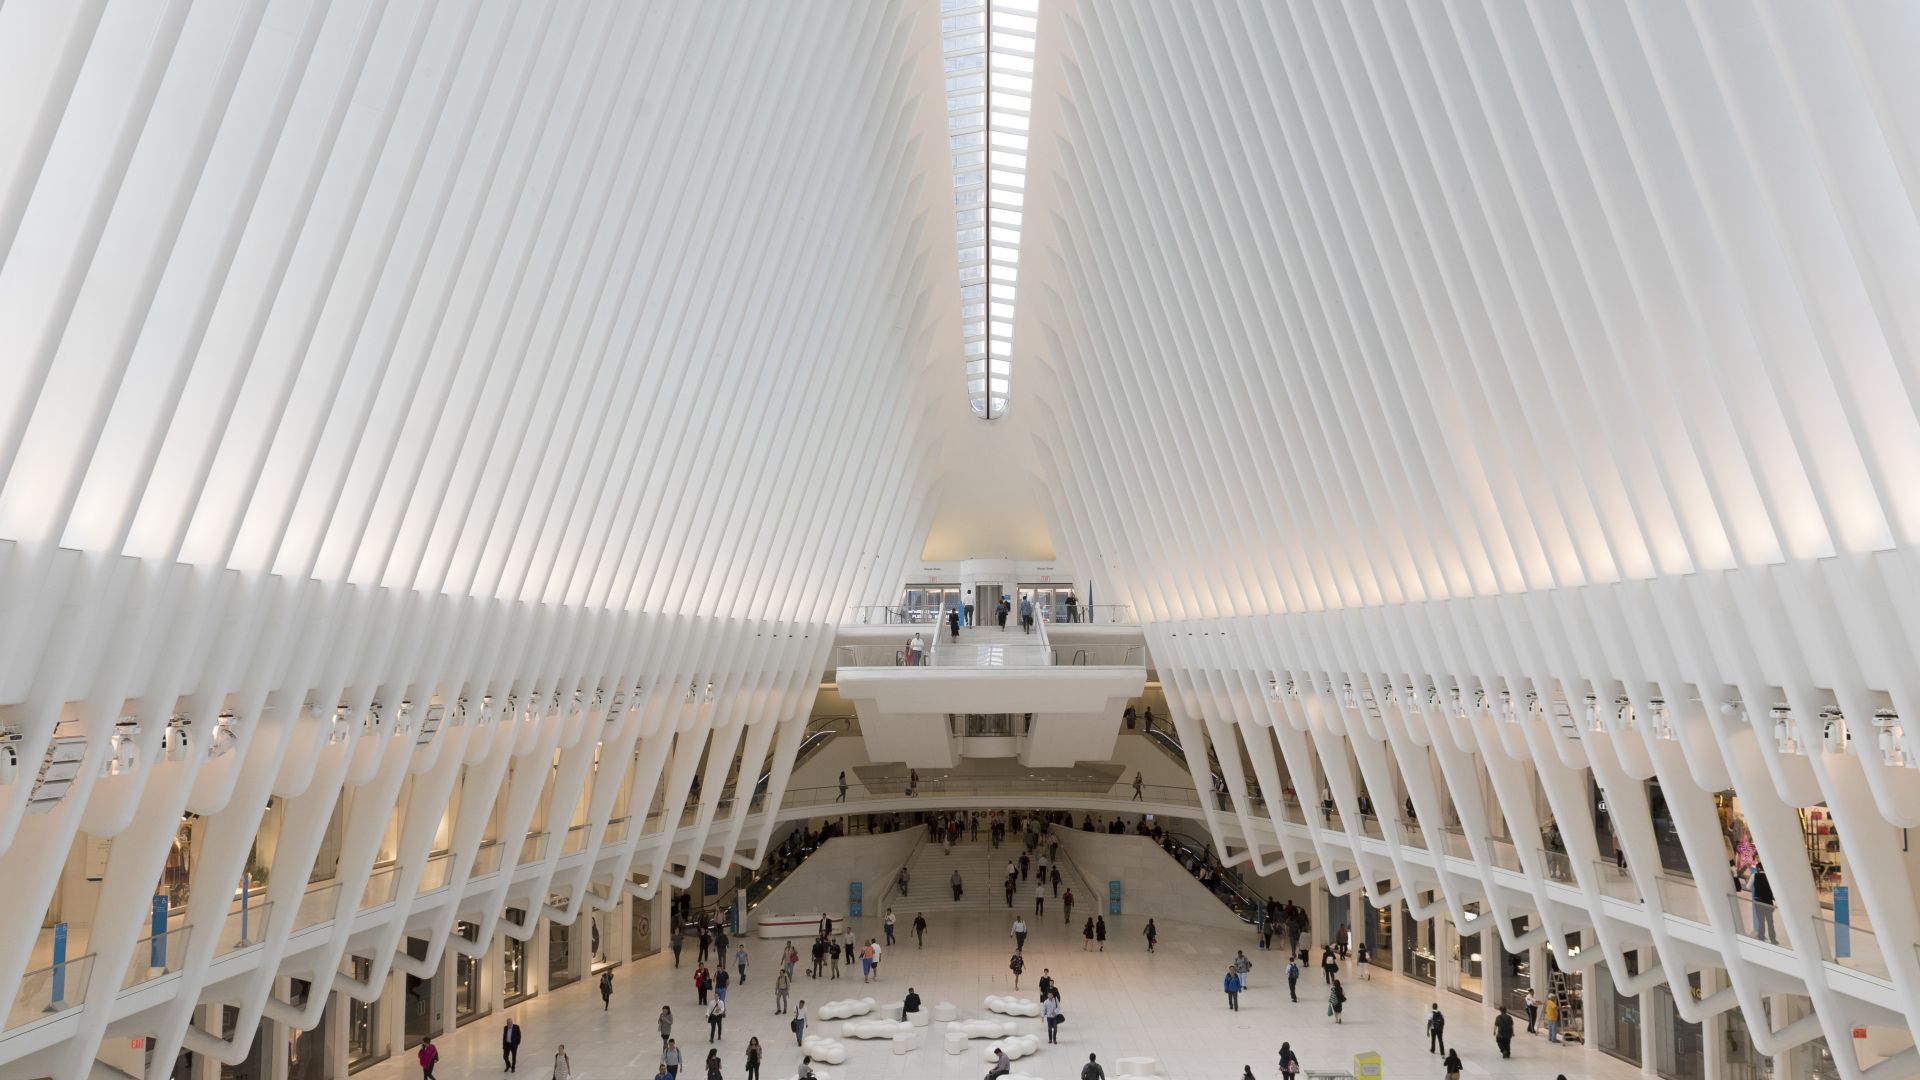 The Oculus, main hall of the PATH station in New York